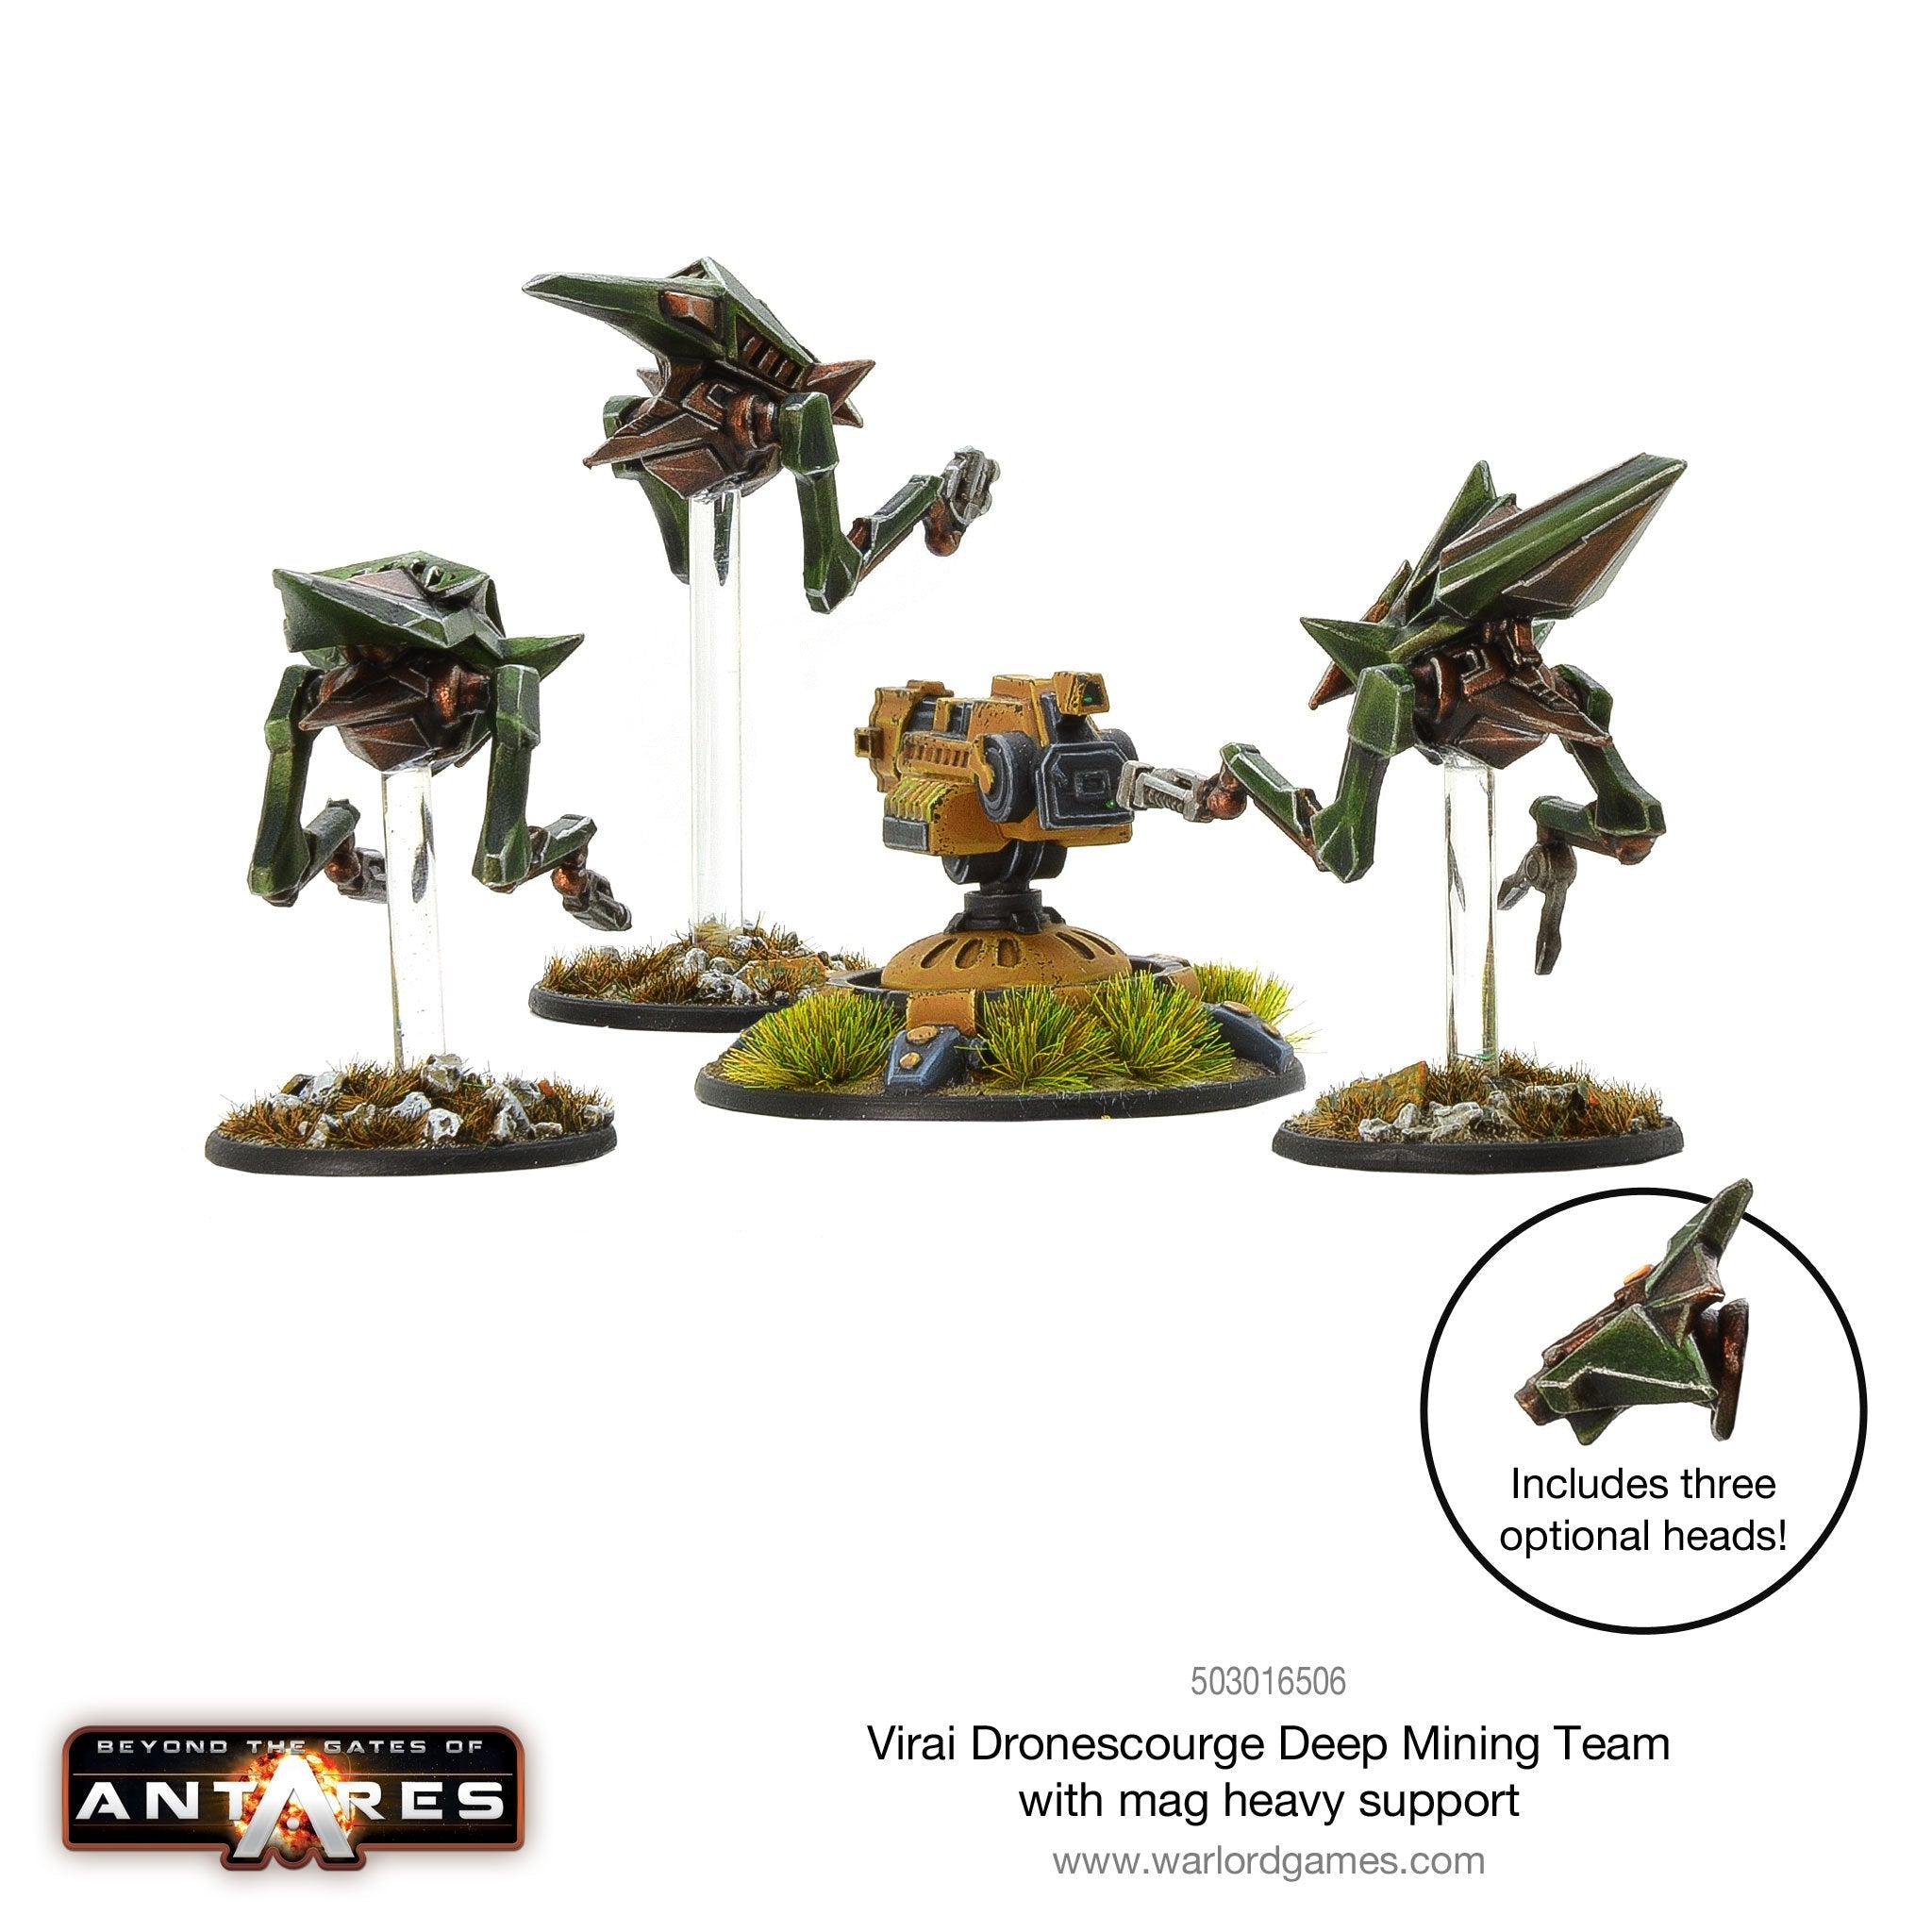 Virai Dronescourge Deep Mining Team with mag heavy support